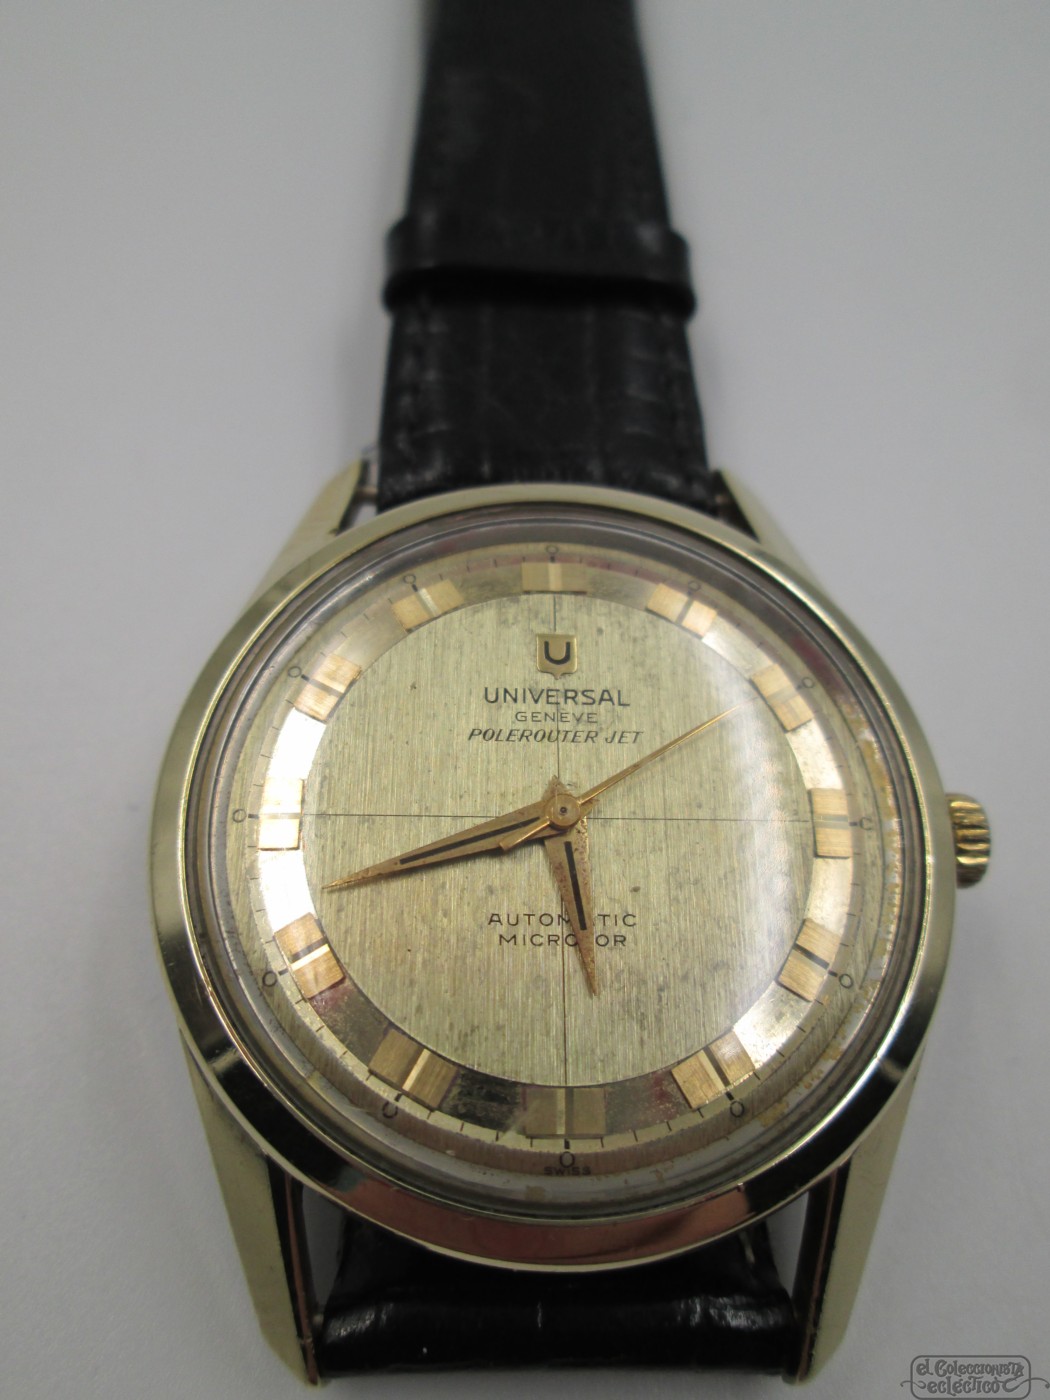 Universal Geneve Polerouter Jet Gold Plated And Steel Automatic ...